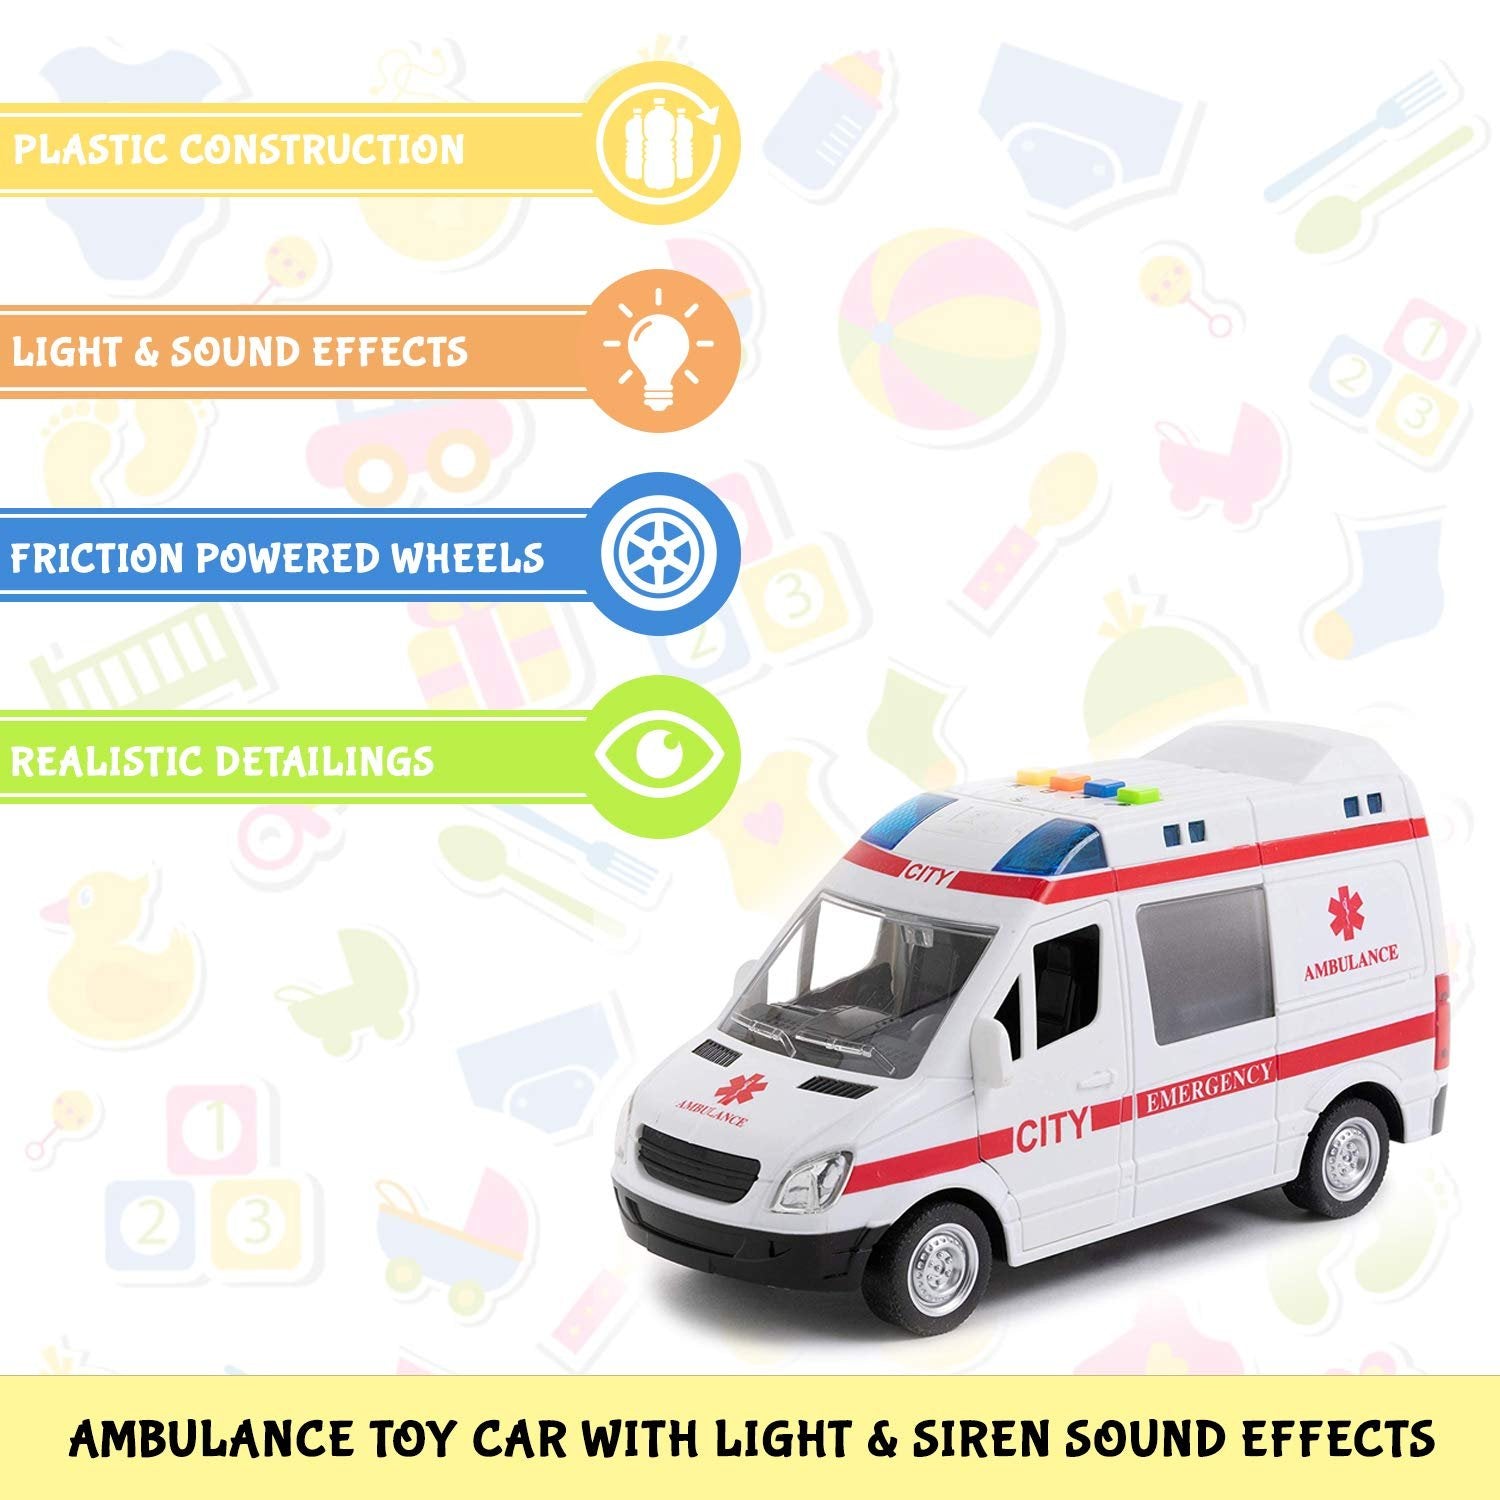 Toy To Enjoy Ambulance Toy Car with Light & Siren Sound Effects - Friction Powered Wheels & LED Lights - Heavy Duty Plastic Rescue Vehicle Toy for Kids & Children